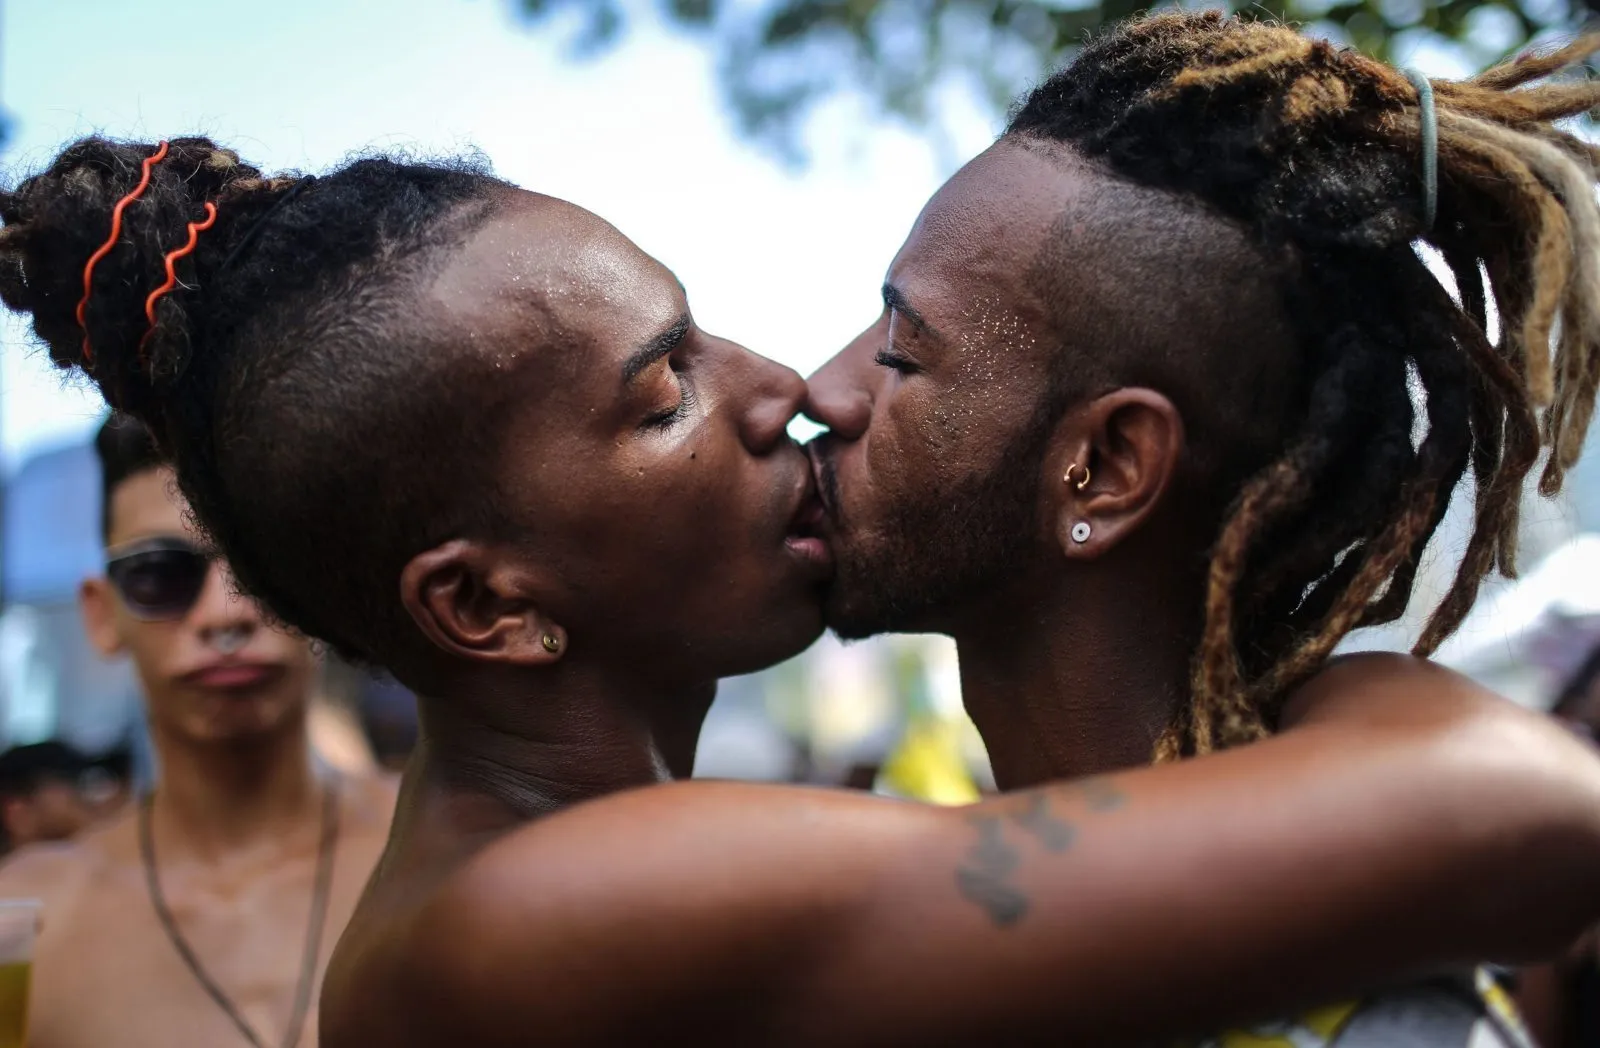 RIO DE JANEIRO, BRAZIL - DECEMBER 11: Revelers kiss during the annual gay pride parade on Copacabana beach December 11, 2016 in Rio de Janeiro, Brazil. Marchers called for expanded rights and protection from violence for those in the LGBT (Lesbian, Gay, Bisexual and Transgender) community. (Photo by Mario Tama/Getty Images)